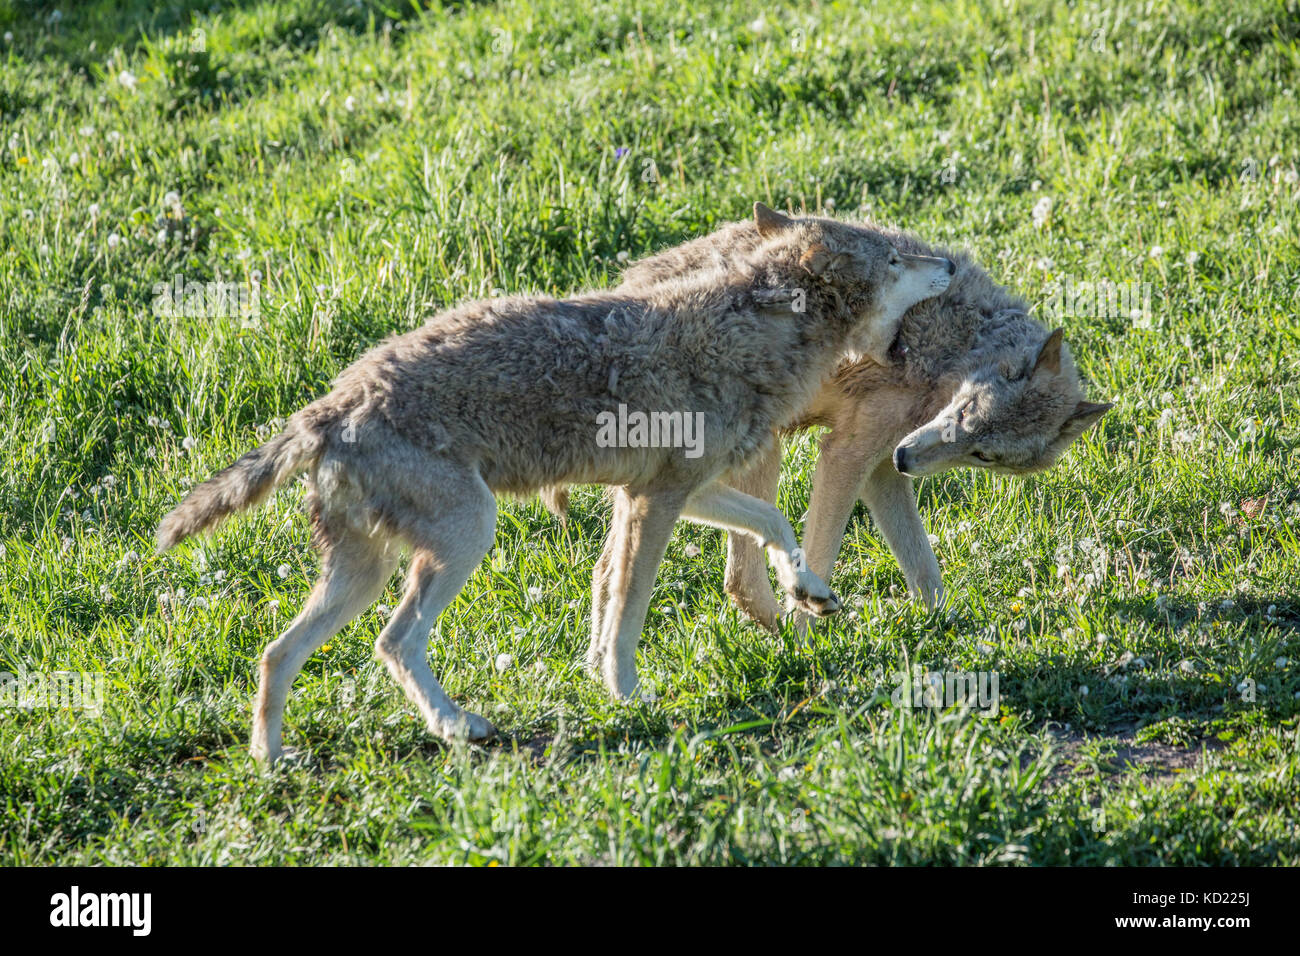 Two Adult Gray Wolves trying to establish dominance as they wrestle in a meadow, near Bozeman, Montana, USA.  Captive animal. Stock Photo